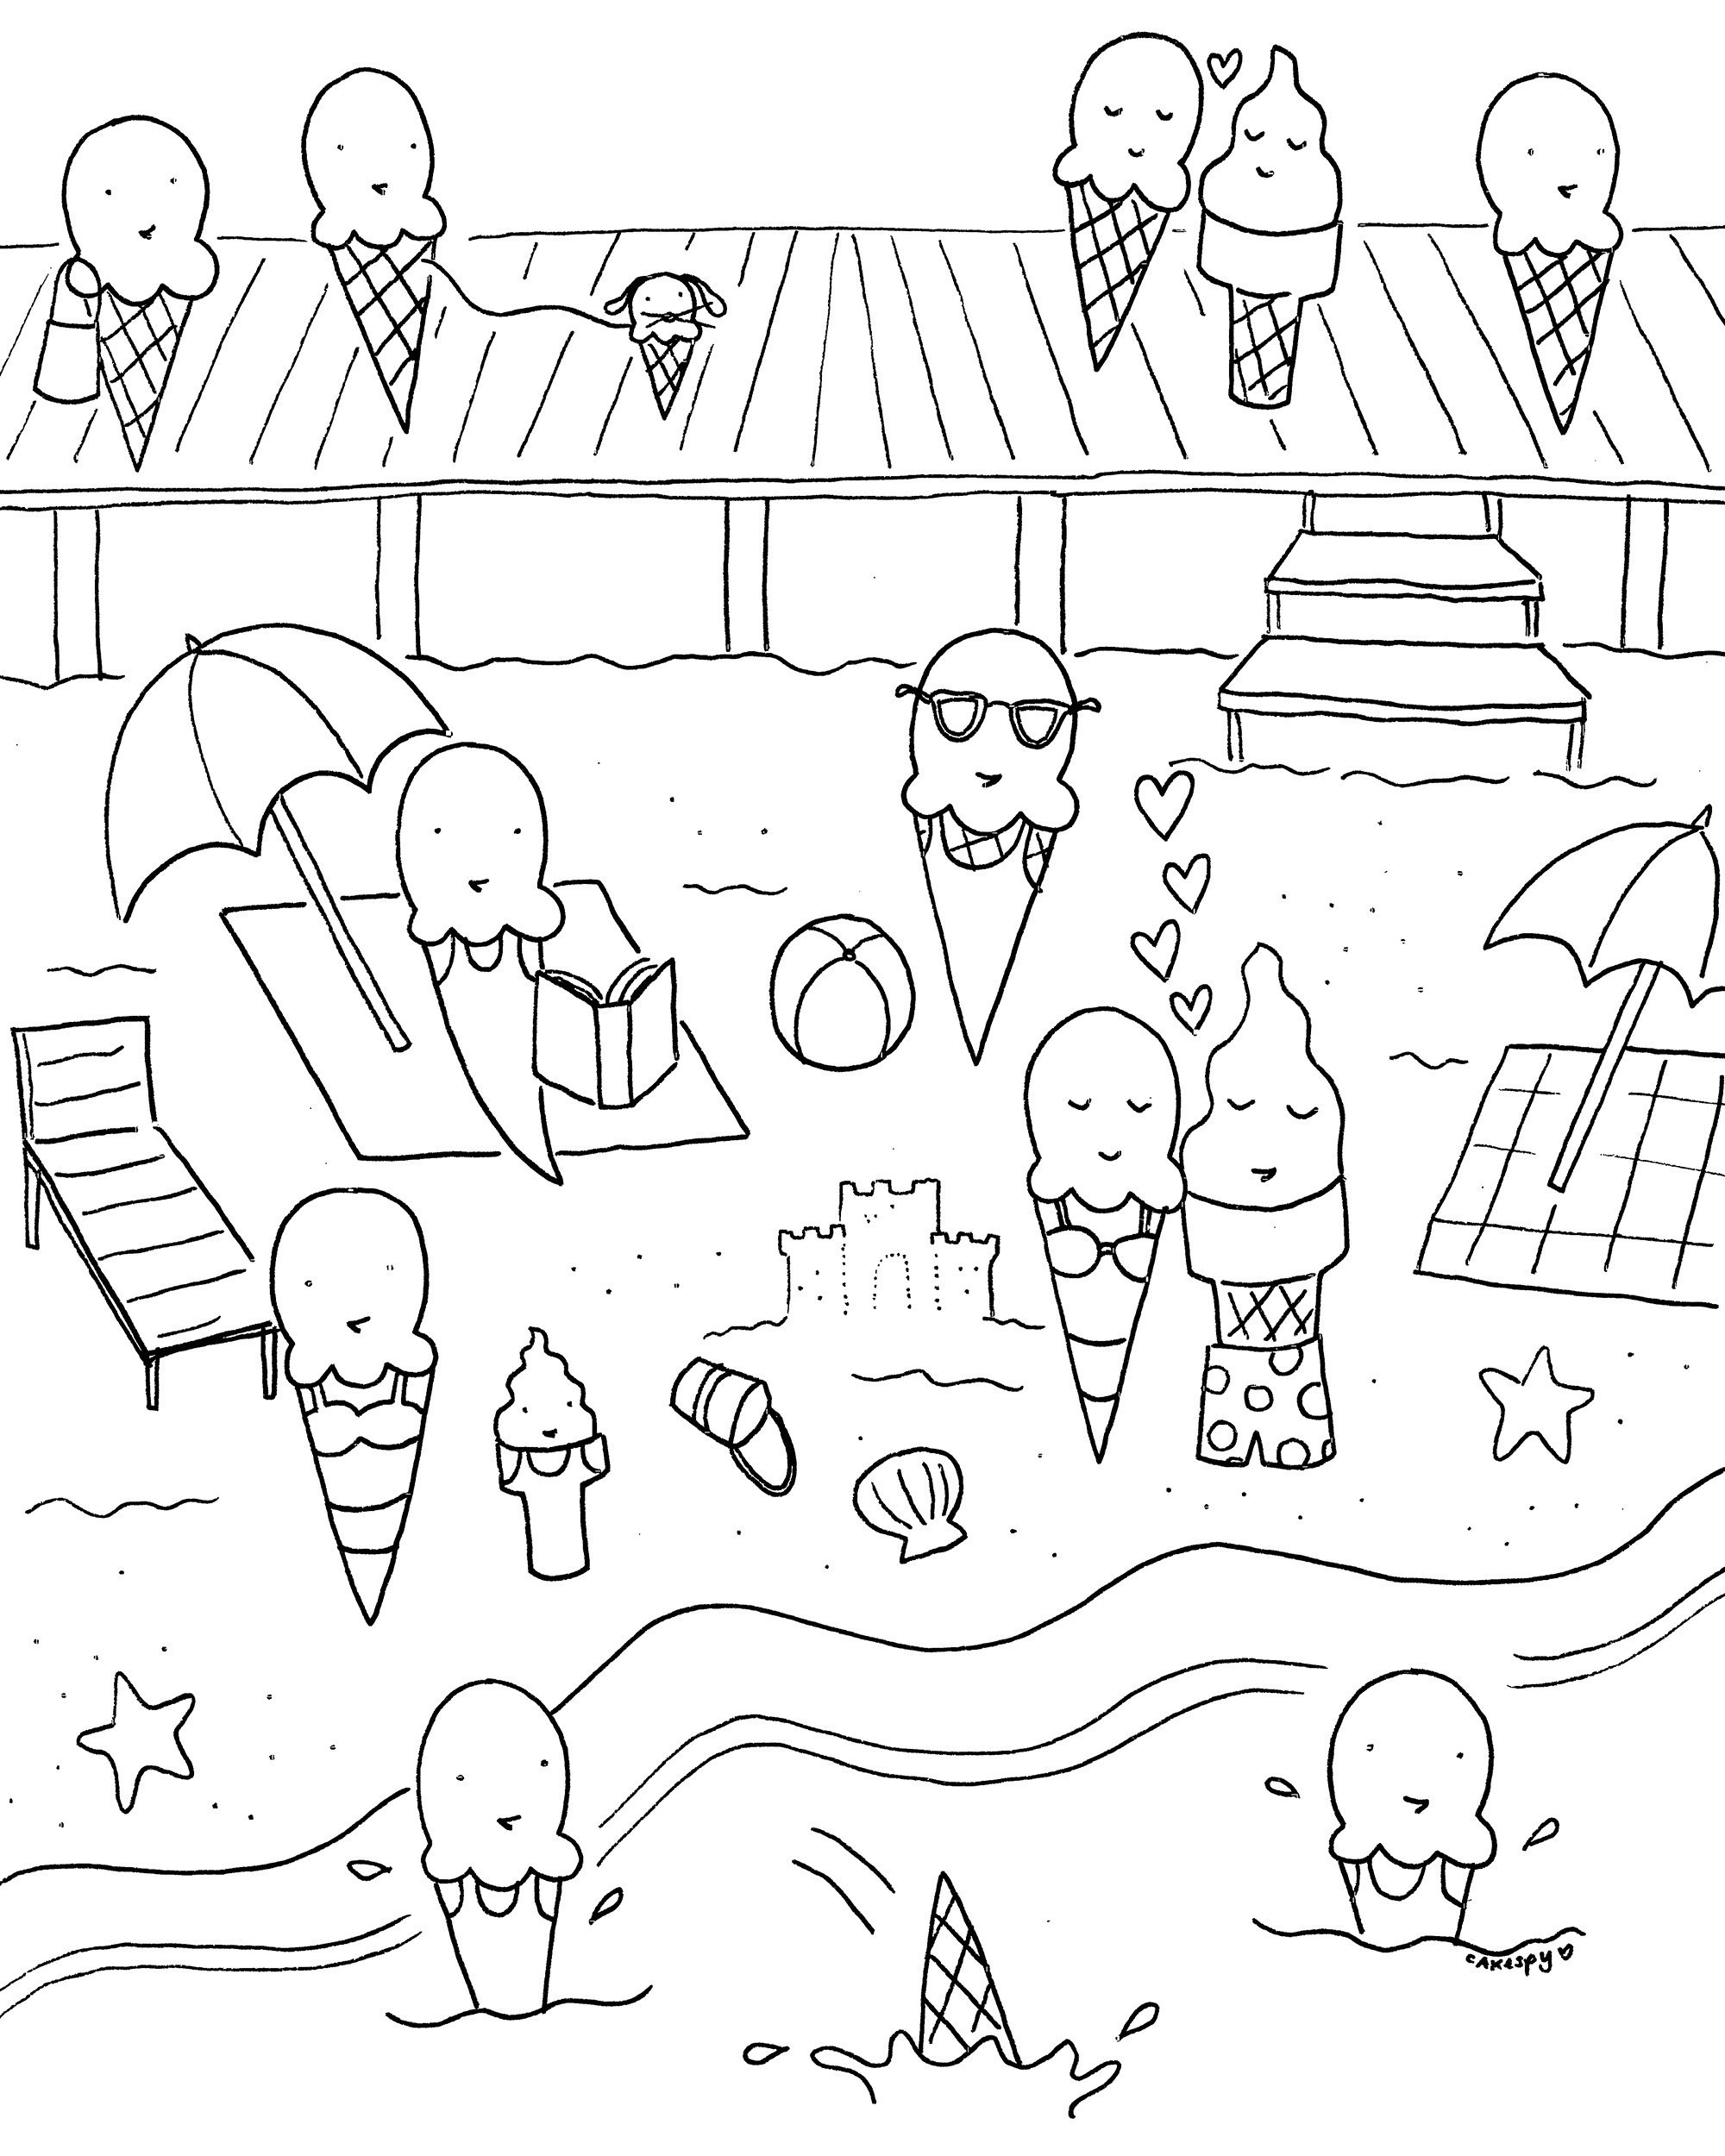 Beach Coloring Pages Printable New Beach Coloring Pages To Print New - Free Printable Summer Coloring Pages For Adults